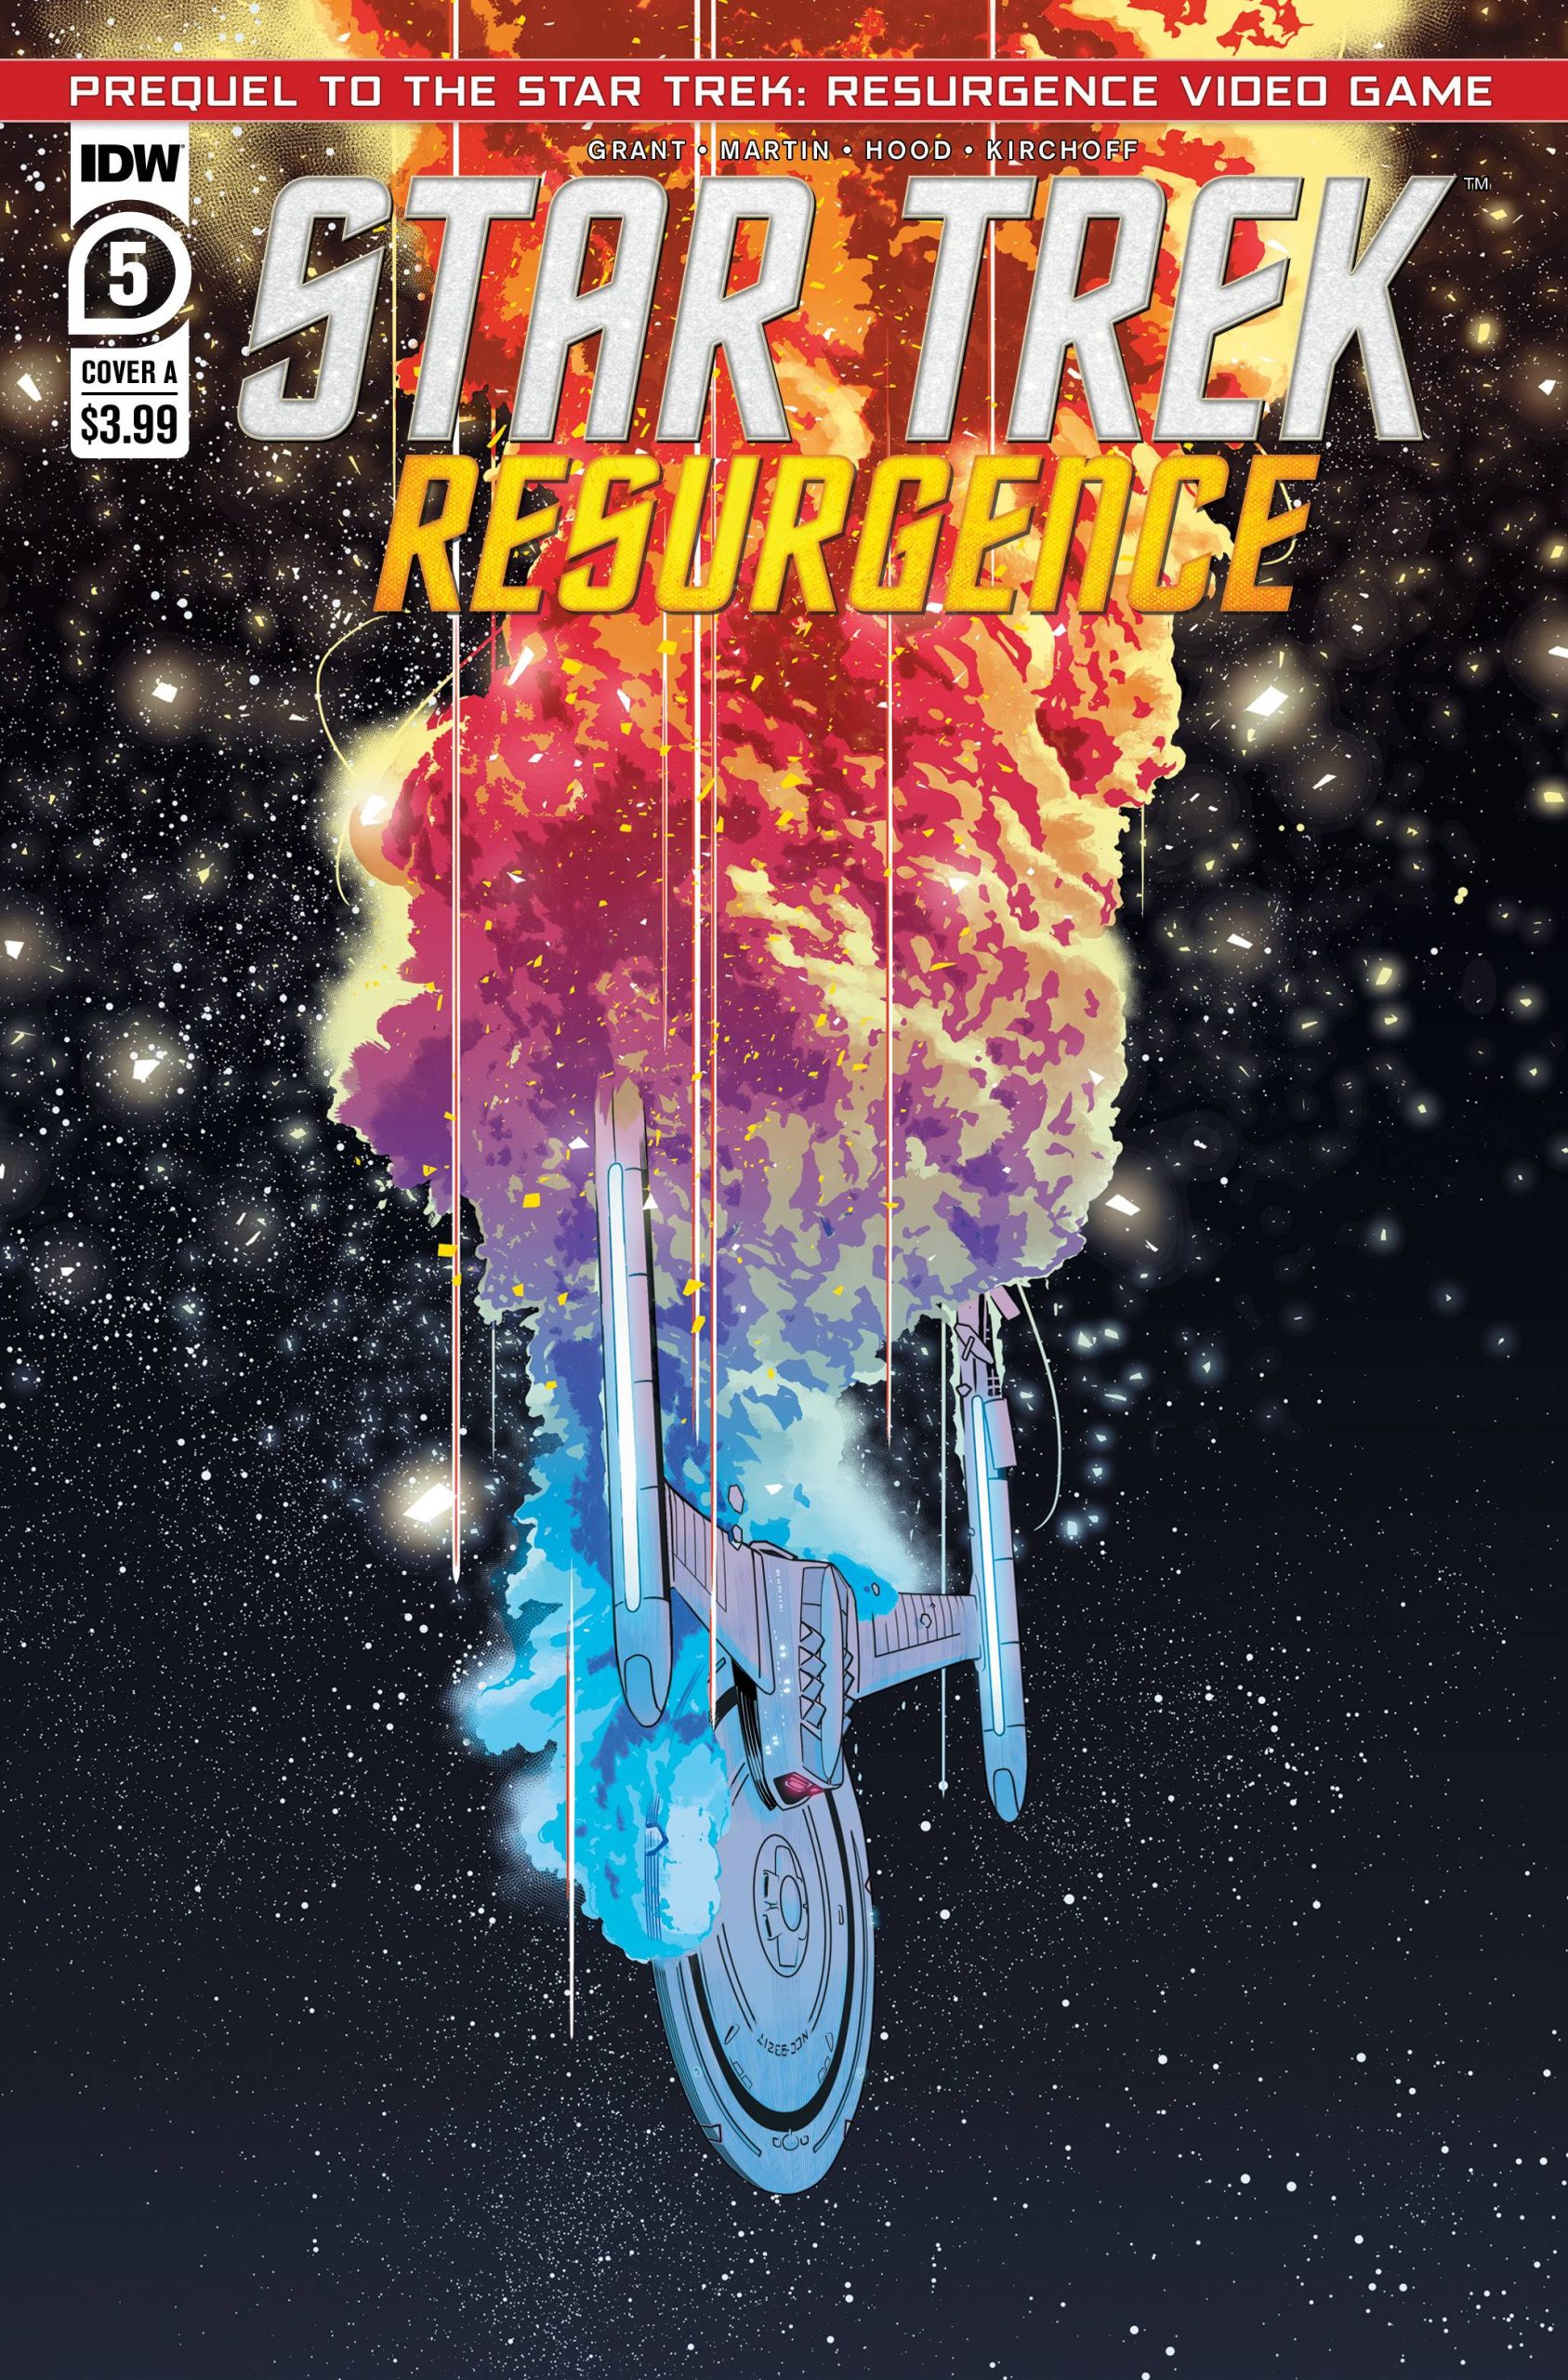 WEDNESDAY COMICS REVIEWS: THE FORGED #1 delivers new sci-fi like a punch